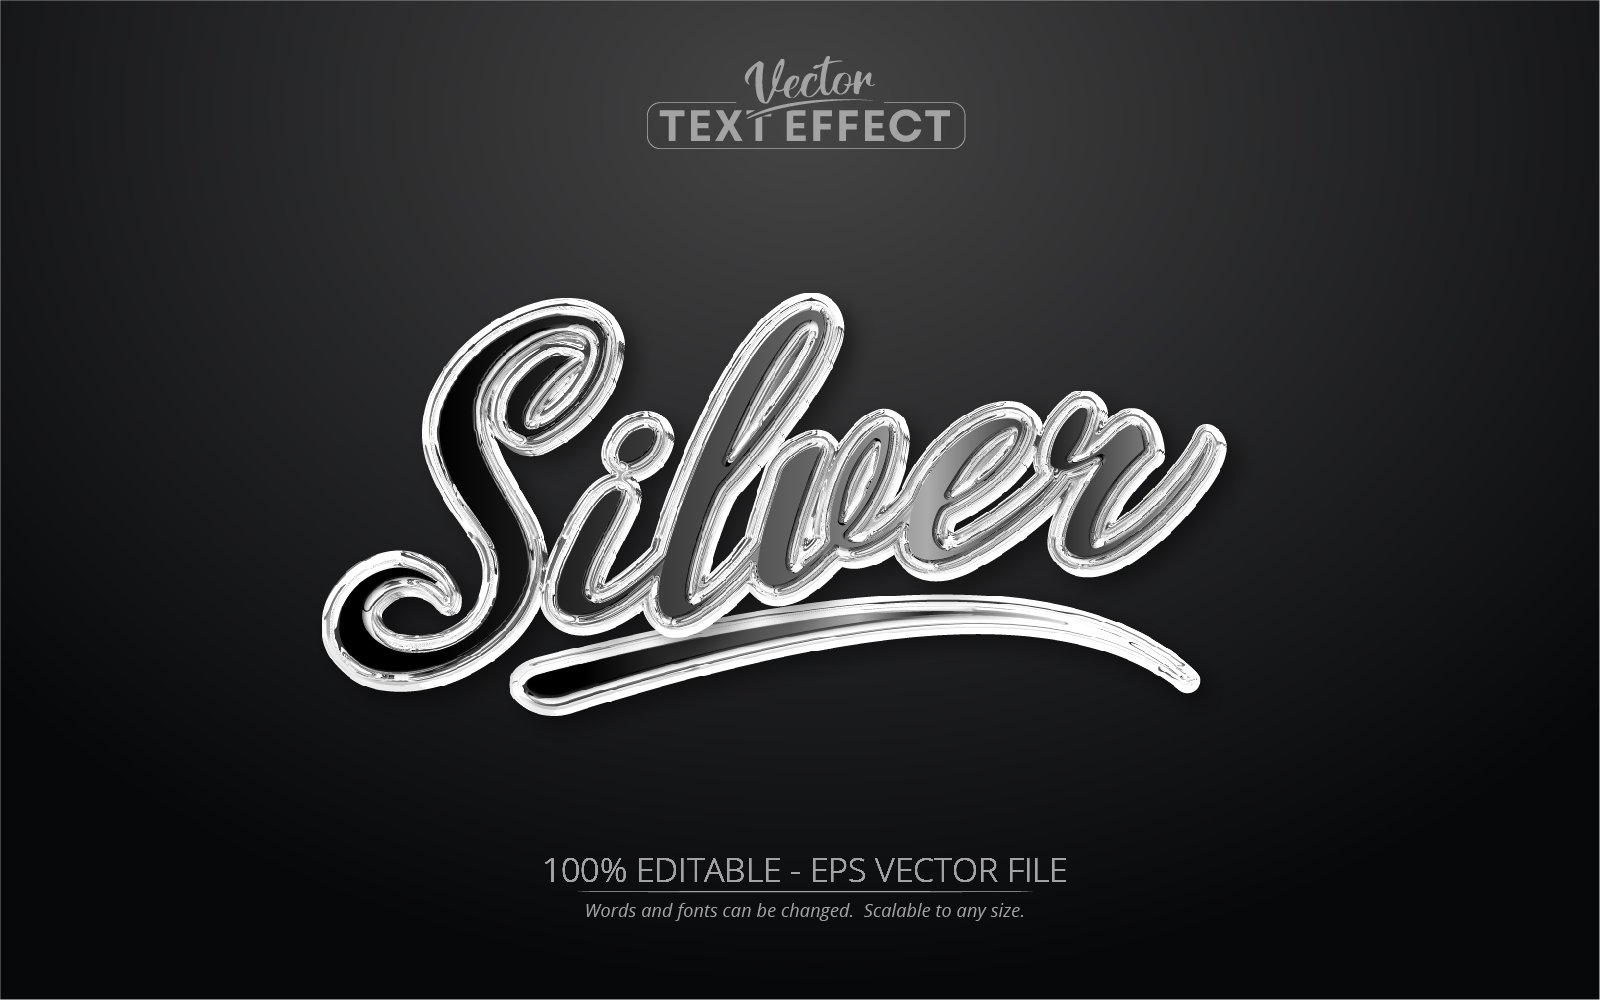 Silver - Editable Text Effect, Calligraphy Metallic Shiny Text Style, Graphics Illustration